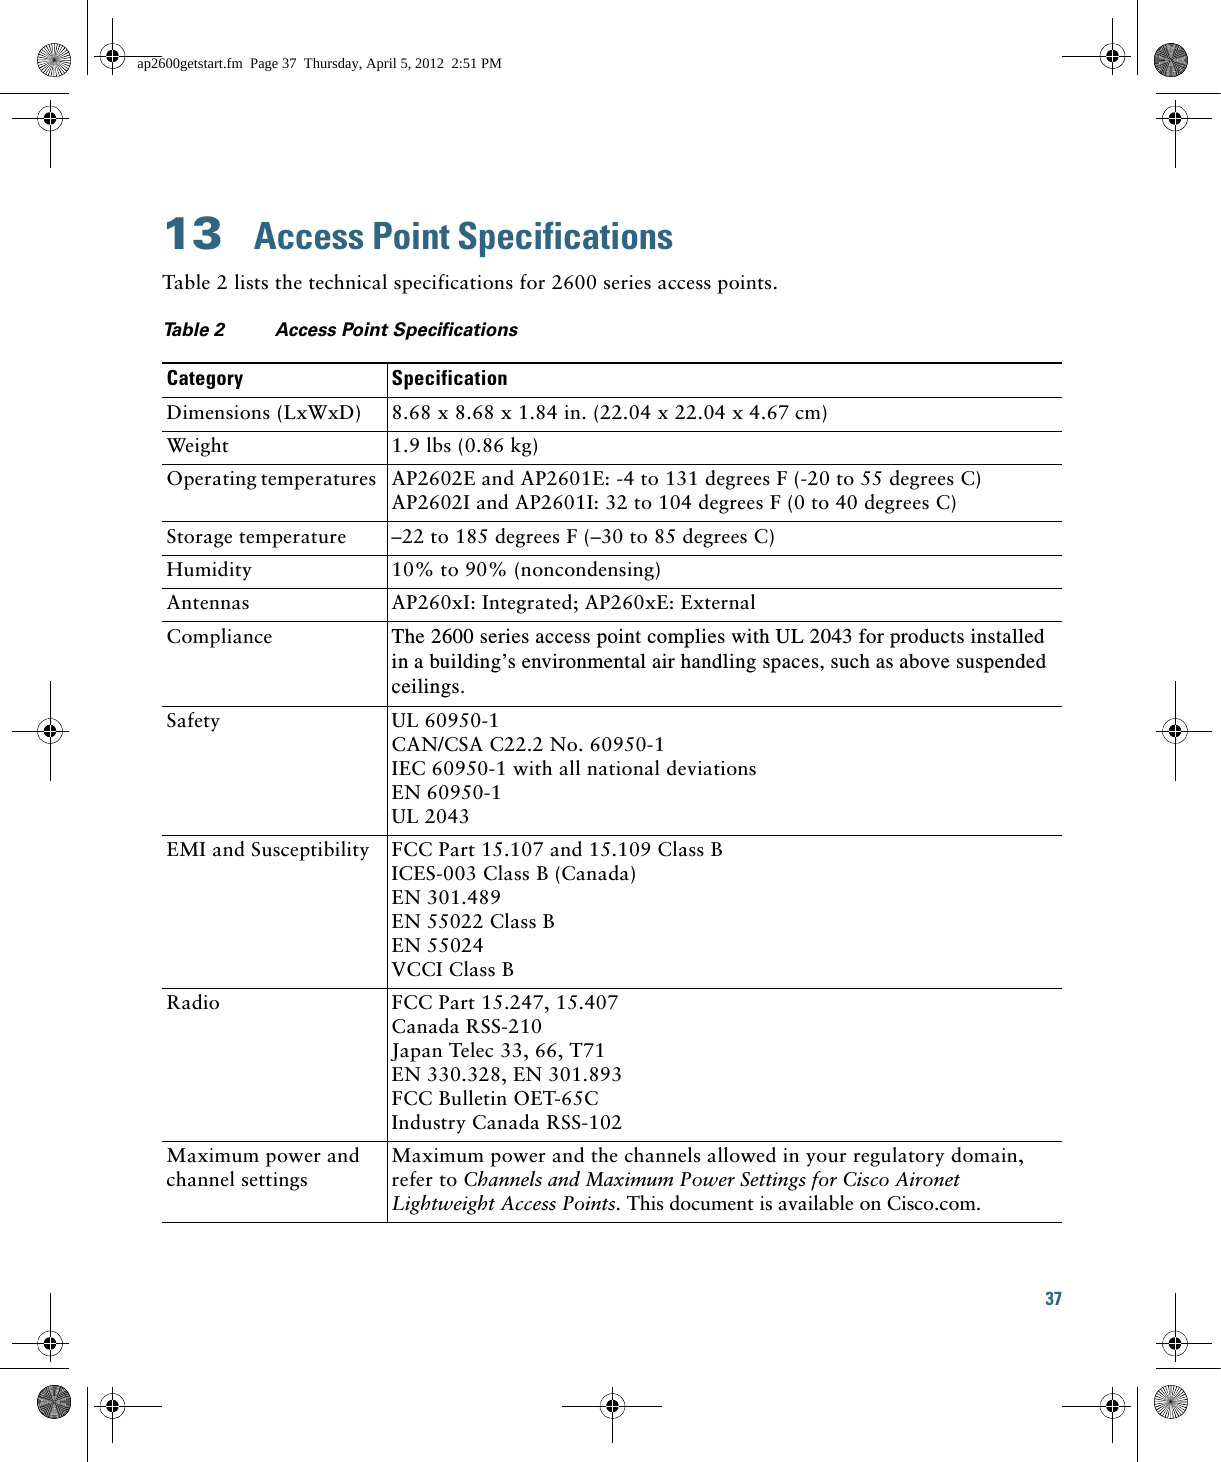 37 13  Access Point SpecificationsTable 2 lists the technical specifications for 2600 series access points.Ta b l e  2 Access Point Specifications  Category SpecificationDimensions (LxWxD) 8.68 x 8.68 x 1.84 in. (22.04 x 22.04 x 4.67 cm) Weight 1.9 lbs (0.86 kg)Operating temperatures AP2602E and AP2601E: -4 to 131 degrees F (-20 to 55 degrees C)AP2602I and AP2601I: 32 to 104 degrees F (0 to 40 degrees C)Storage temperature –22 to 185 degrees F (–30 to 85 degrees C)Humidity 10% to 90% (noncondensing)Antennas AP260xI: Integrated; AP260xE: ExternalCompliance The 2600 series access point complies with UL 2043 for products installed in a building’s environmental air handling spaces, such as above suspended ceilings.Safety UL 60950-1CAN/CSA C22.2 No. 60950-1IEC 60950-1 with all national deviationsEN 60950-1UL 2043EMI and Susceptibility FCC Part 15.107 and 15.109 Class BICES-003 Class B (Canada)EN 301.489EN 55022 Class B EN 55024VCCI Class BRadio FCC Part 15.247, 15.407Canada RSS-210Japan Telec 33, 66, T71EN 330.328, EN 301.893FCC Bulletin OET-65CIndustry Canada RSS-102Maximum power and channel settingsMaximum power and the channels allowed in your regulatory domain, refer to Channels and Maximum Power Settings for Cisco Aironet Lightweight Access Points. This document is available on Cisco.com.ap2600getstart.fm  Page 37  Thursday, April 5, 2012  2:51 PM